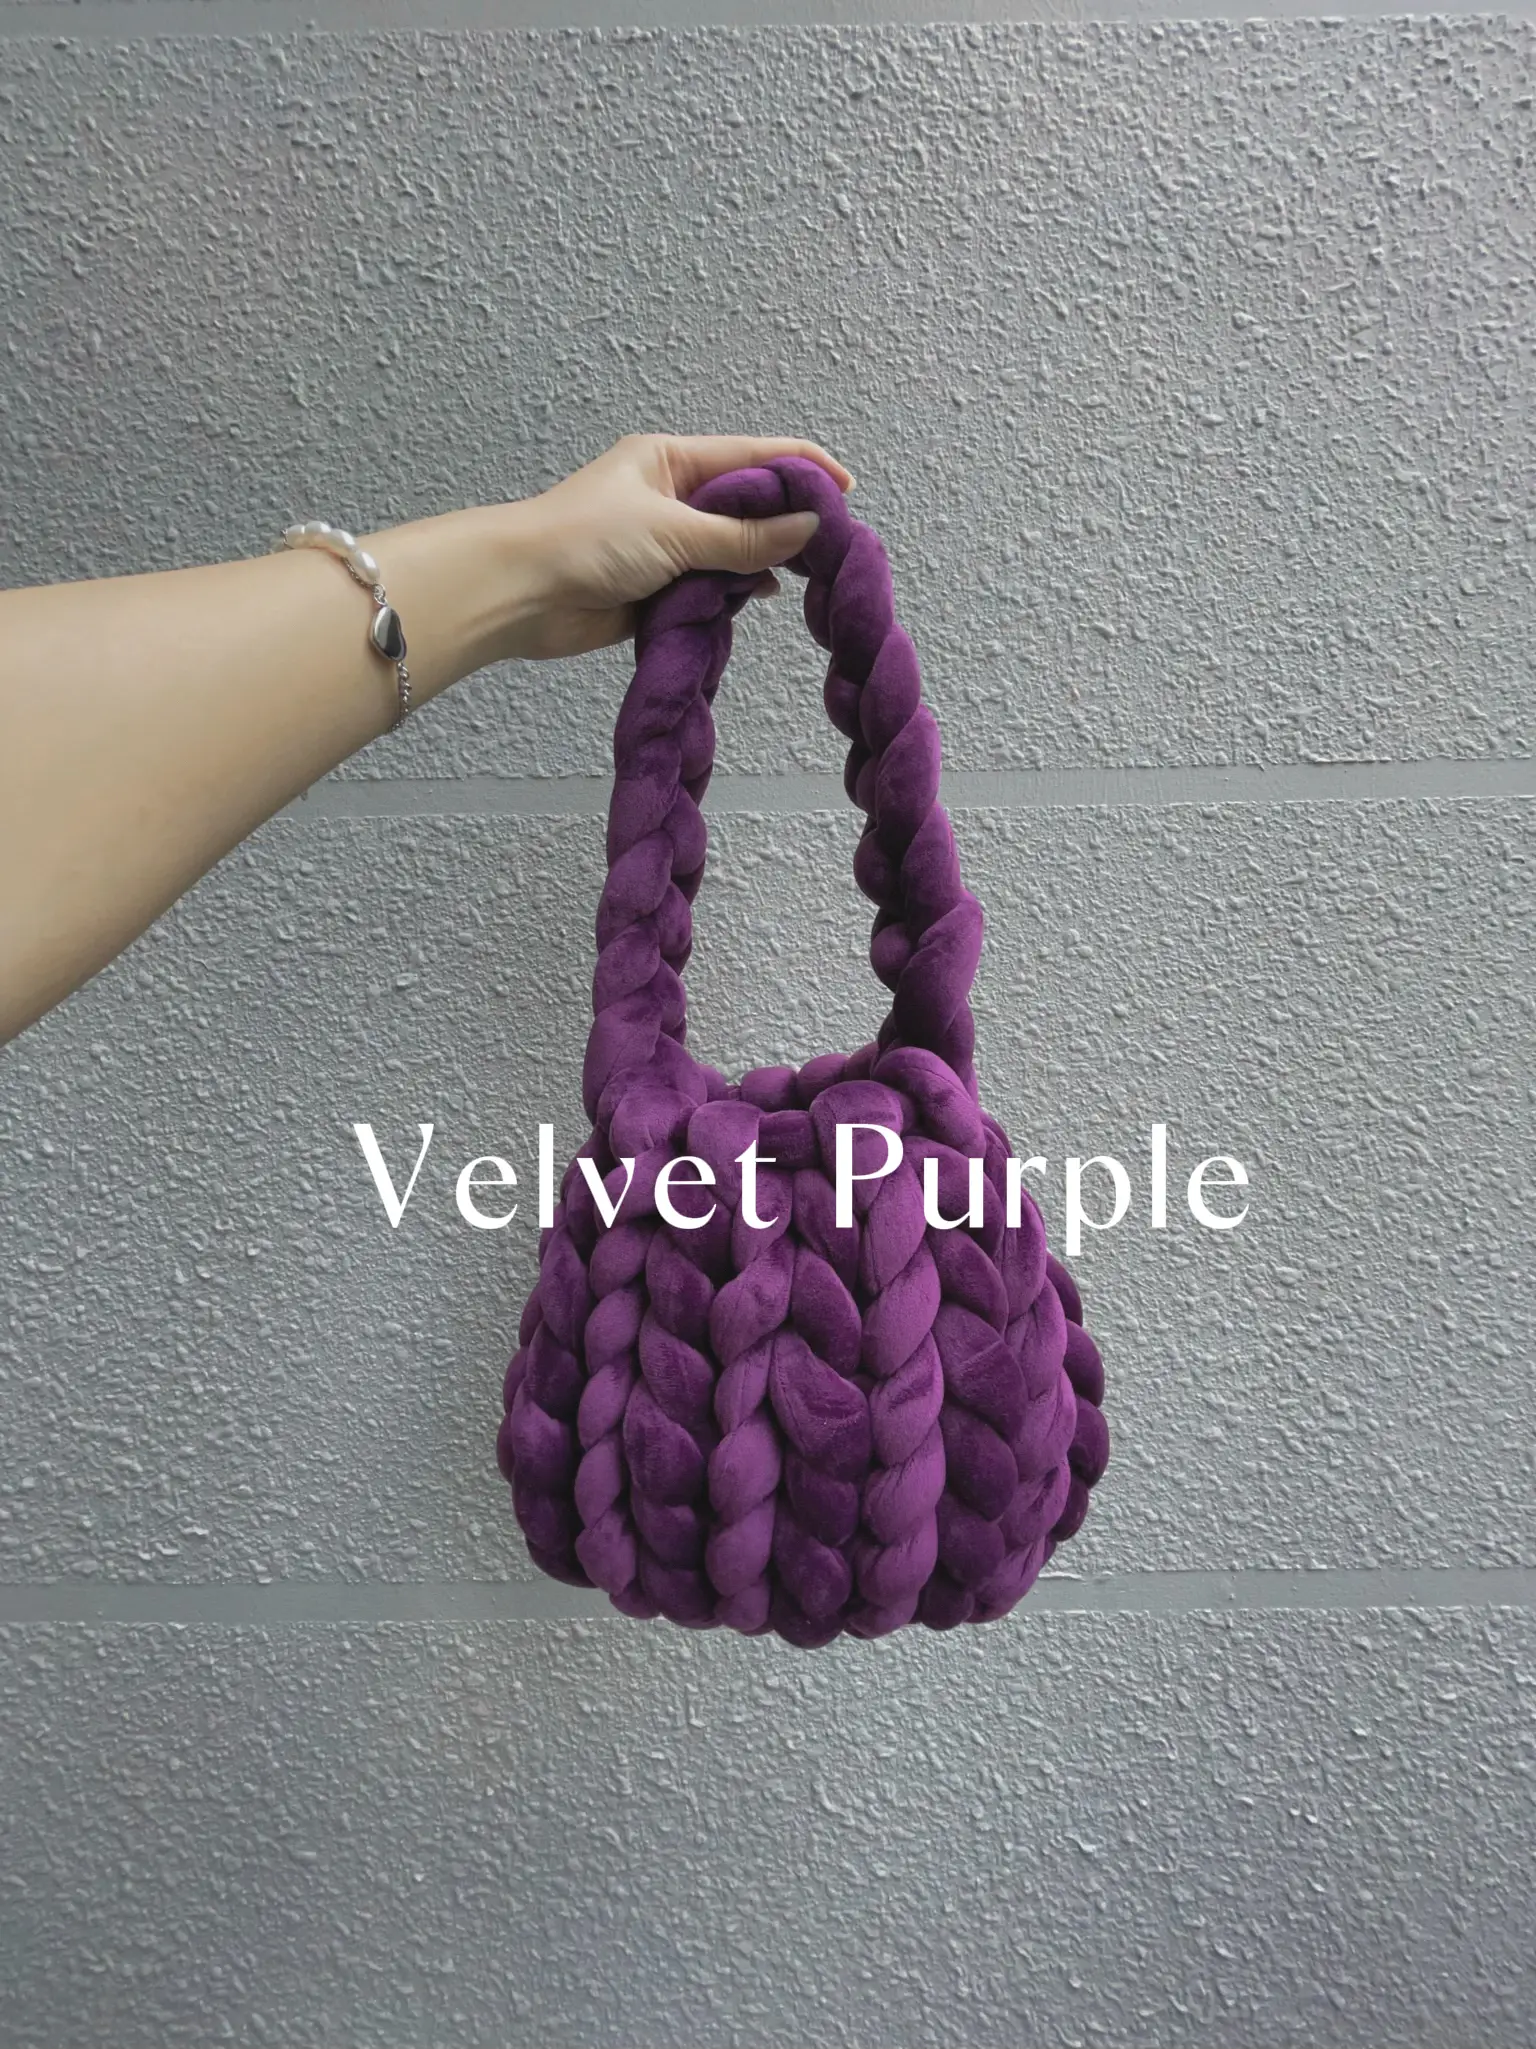 CUTEST CNY BAG U CAN HAND KNIT IN 30 MINS 😙😙😙, Gallery posted by Jeslyn  ✨